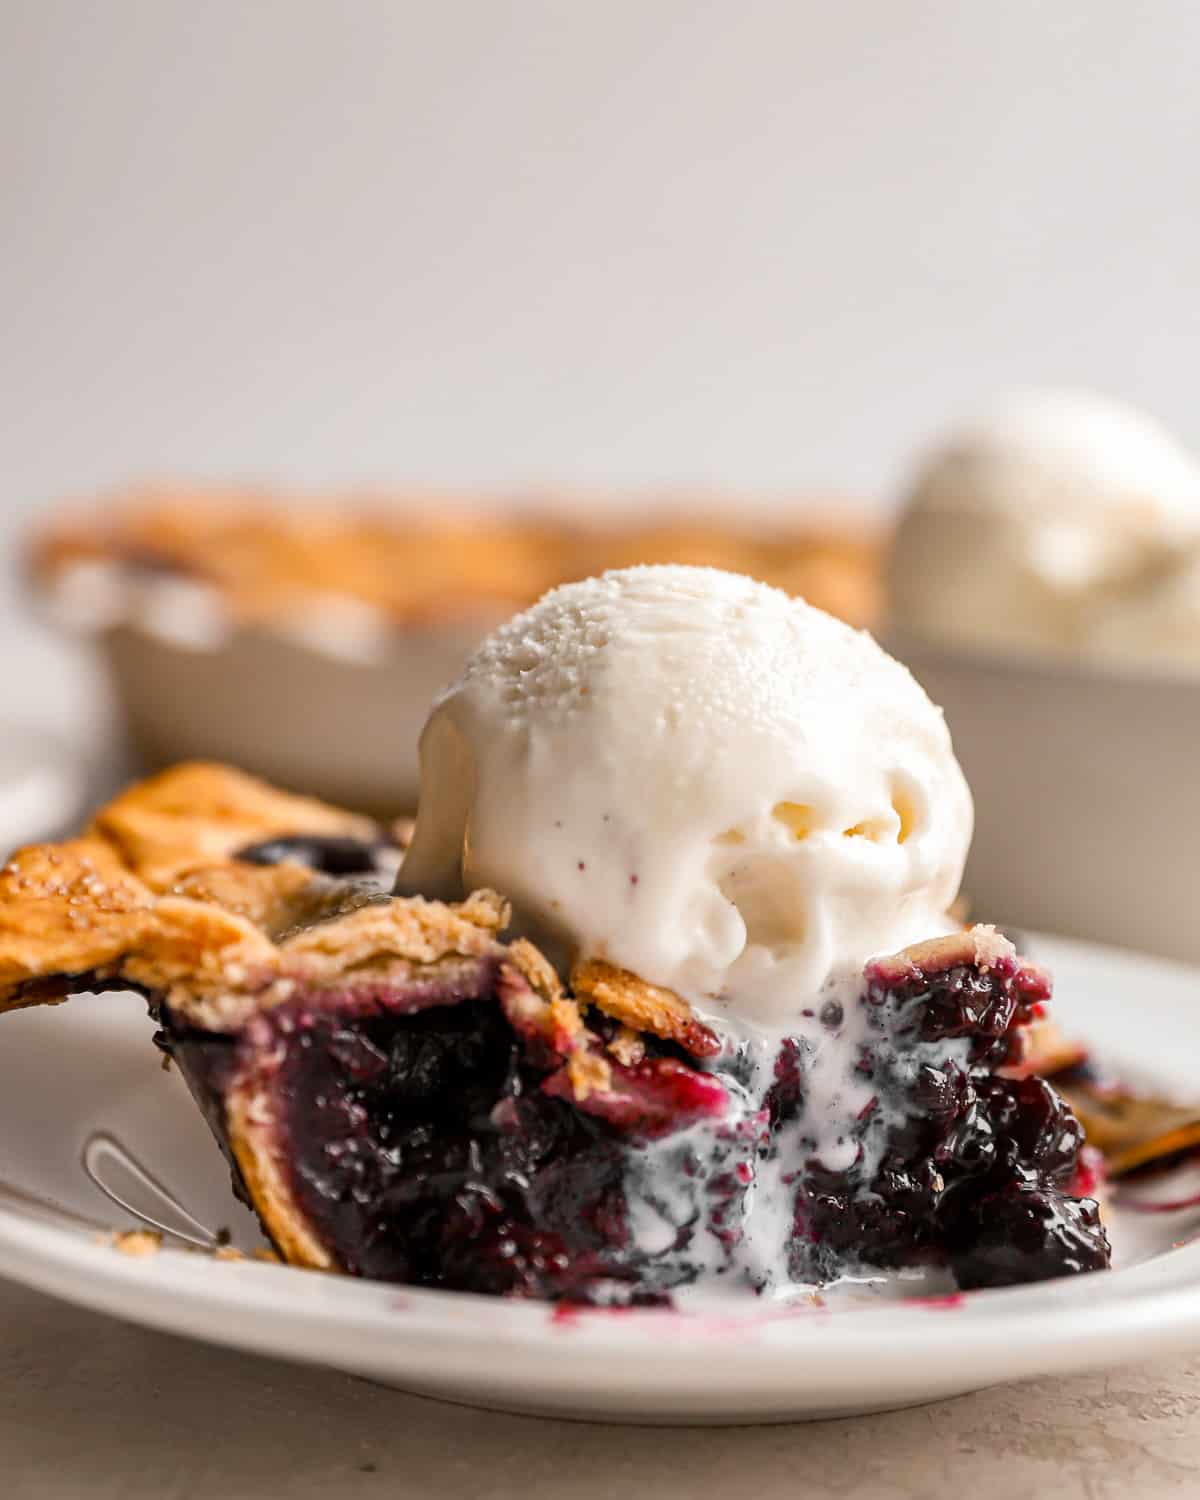 Blueberry Pie Homemade Ice Cream Recipe (Video) - A Spicy Perspective